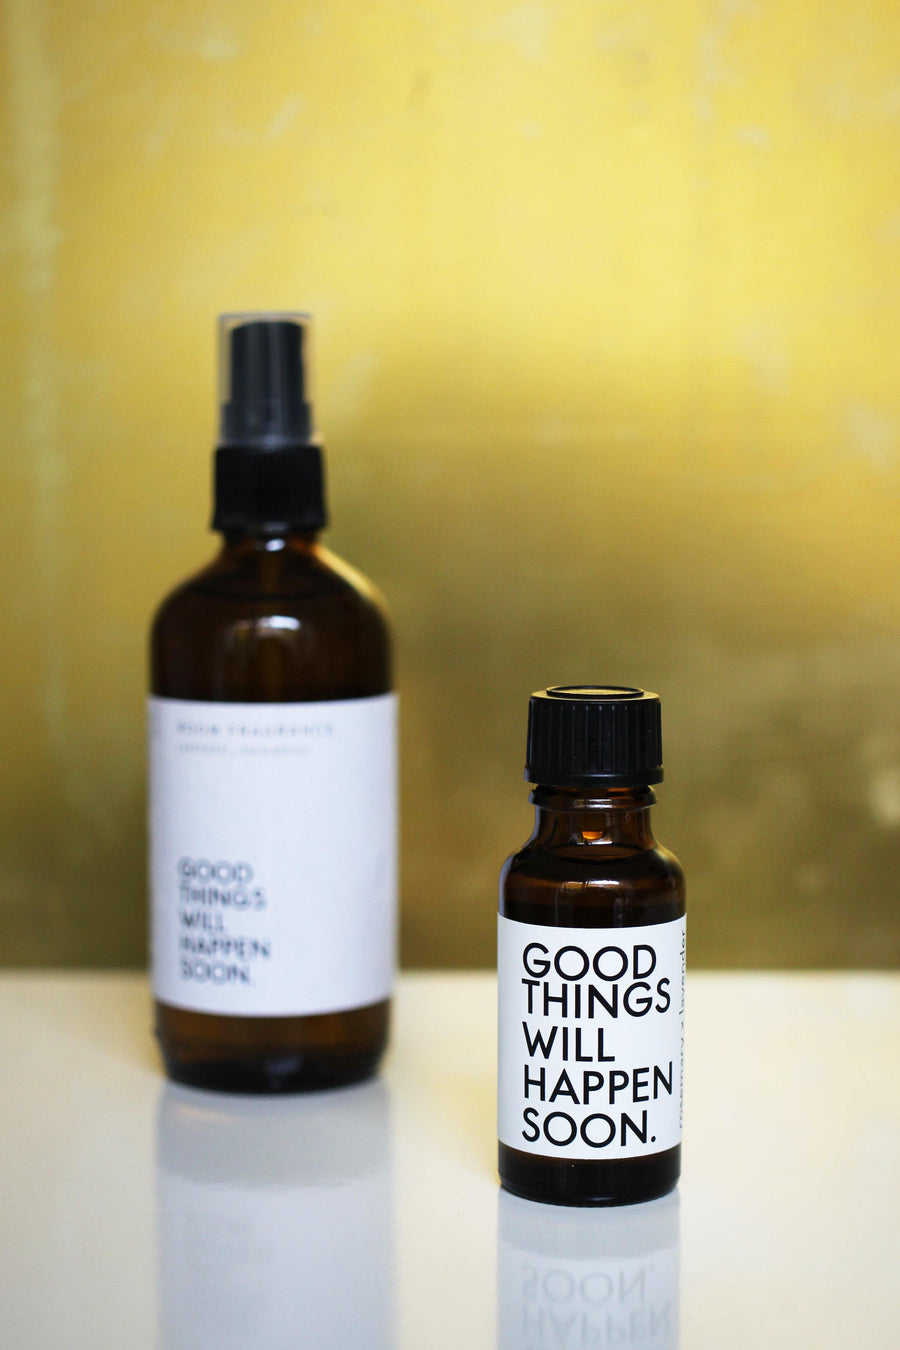 Good Things Will Happen Soon x Coudre Berlin Essential Oil - The Good Store Berlin